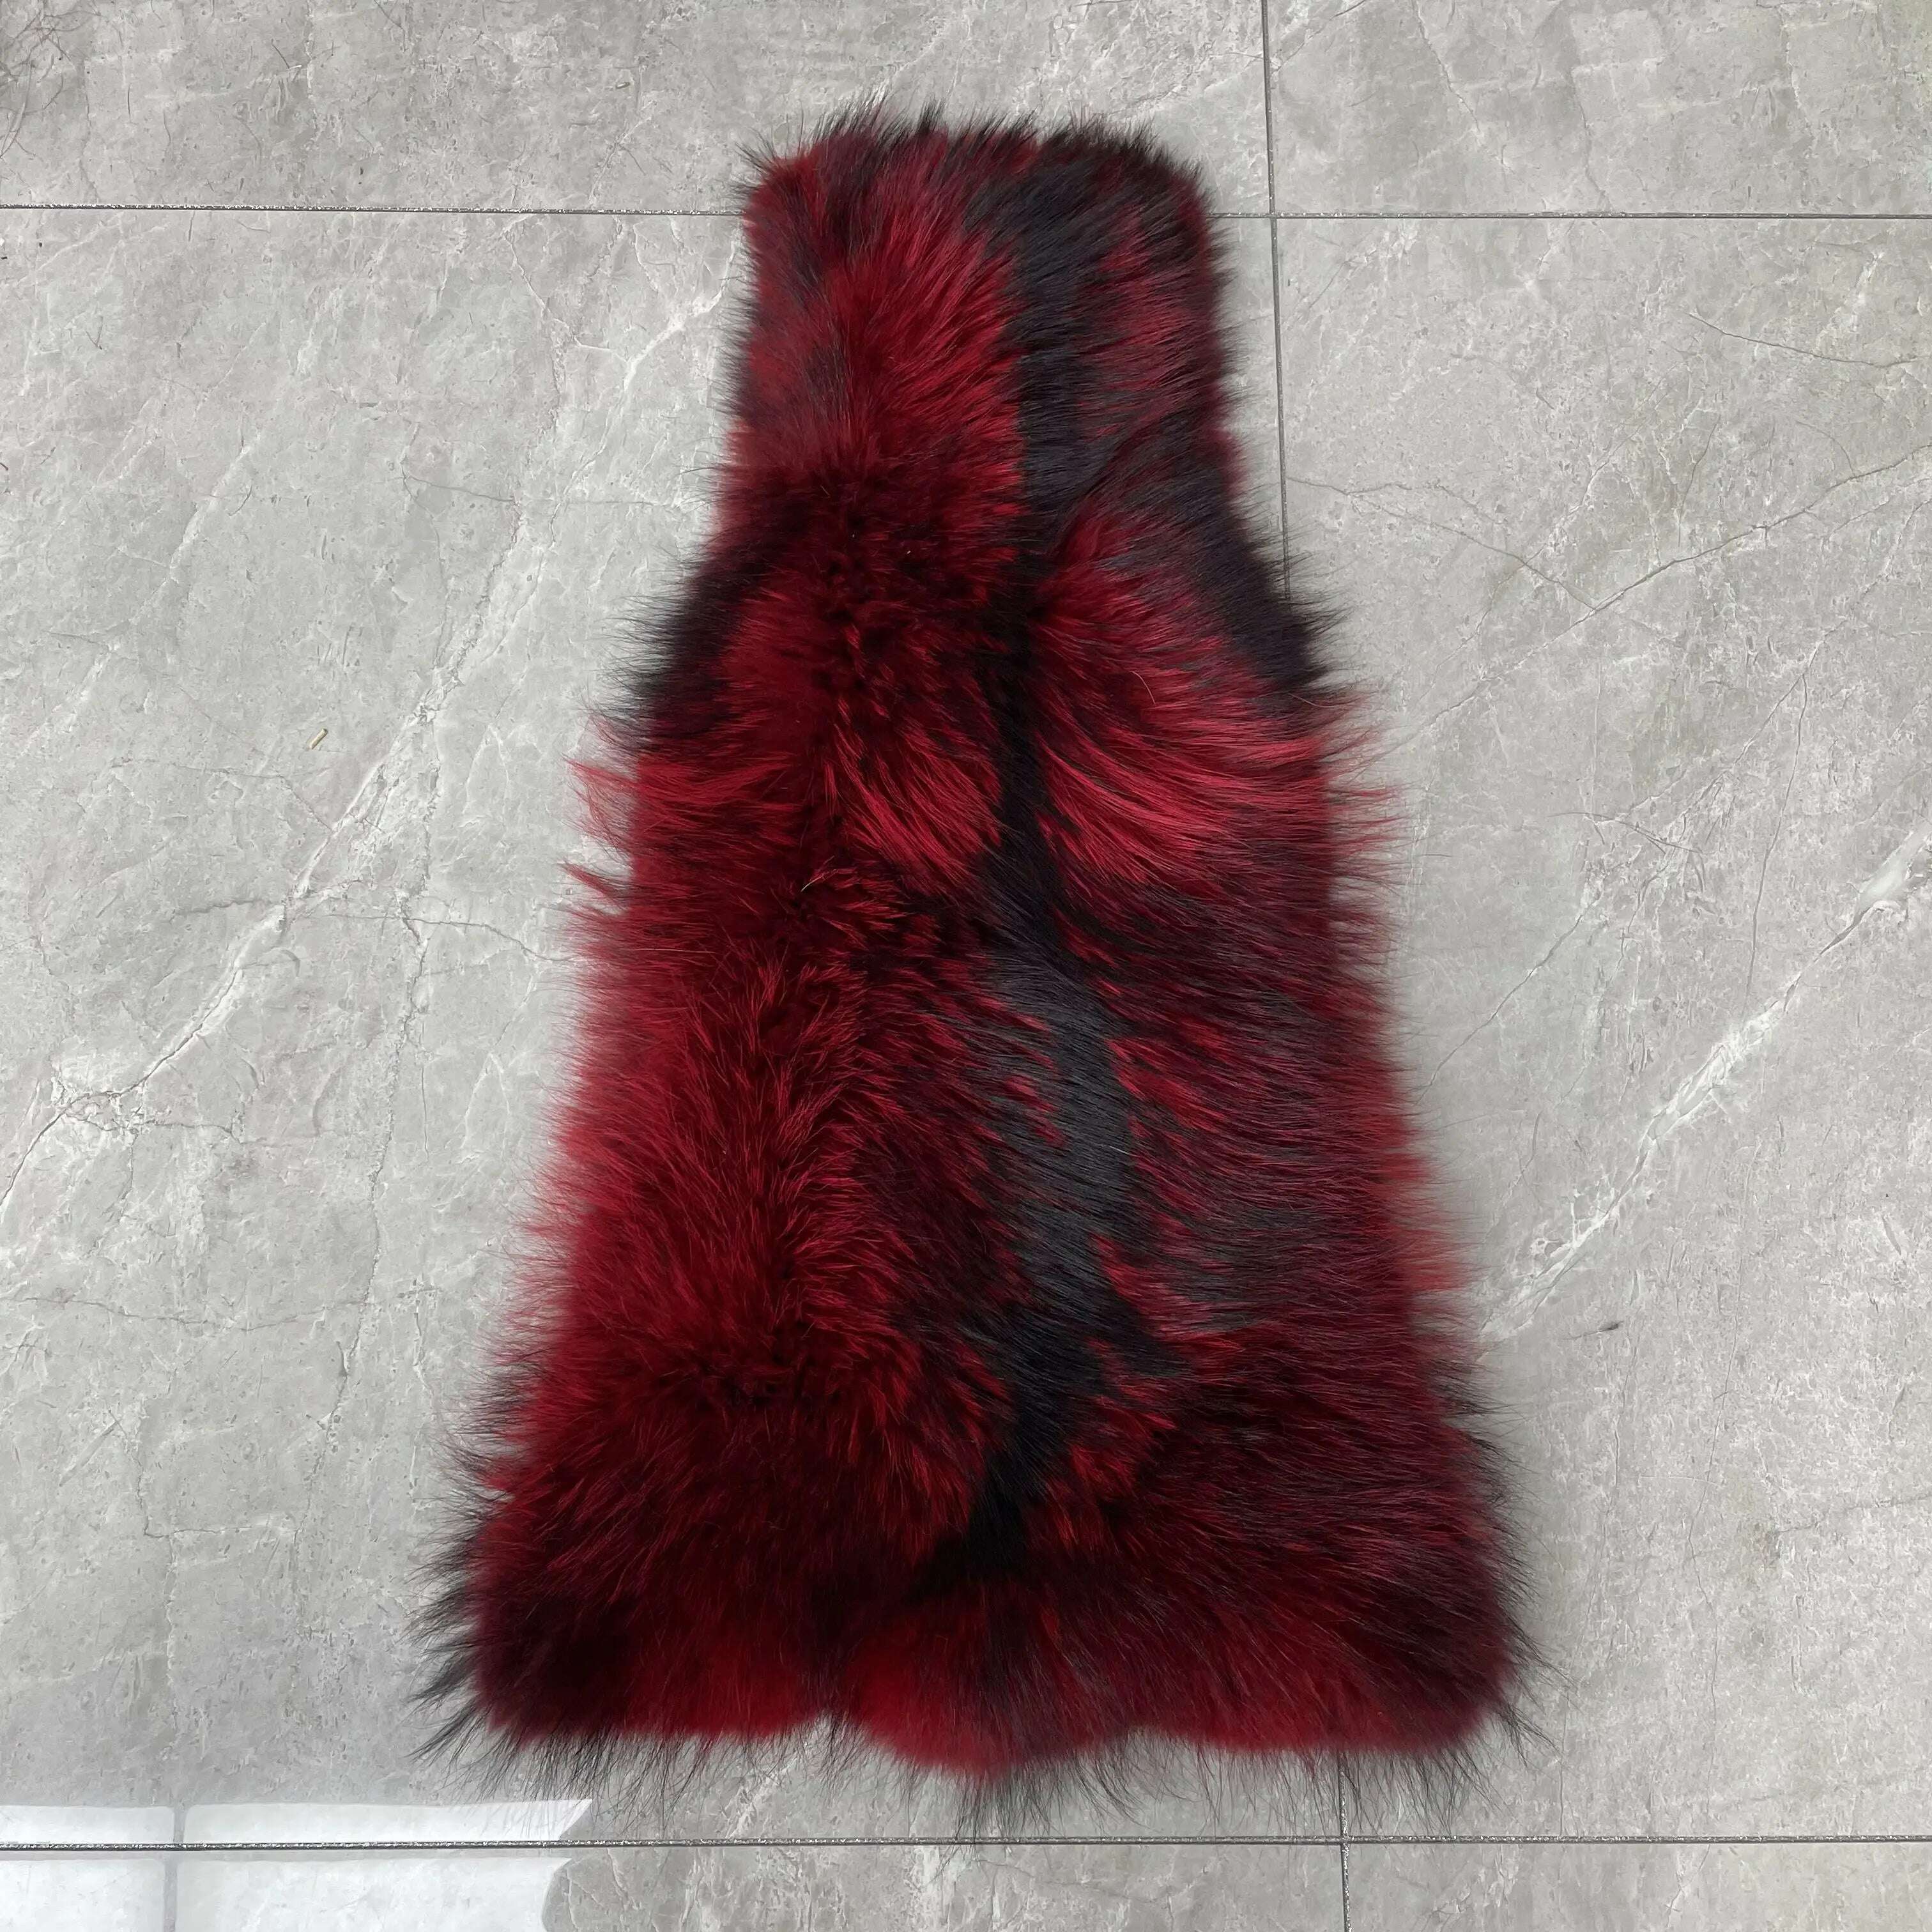 KIMLUD, Men Clothes Golden Island White Special Fox Fur Coat Full Pelt Customized Size Available, RED / XS(88cm), KIMLUD Womens Clothes